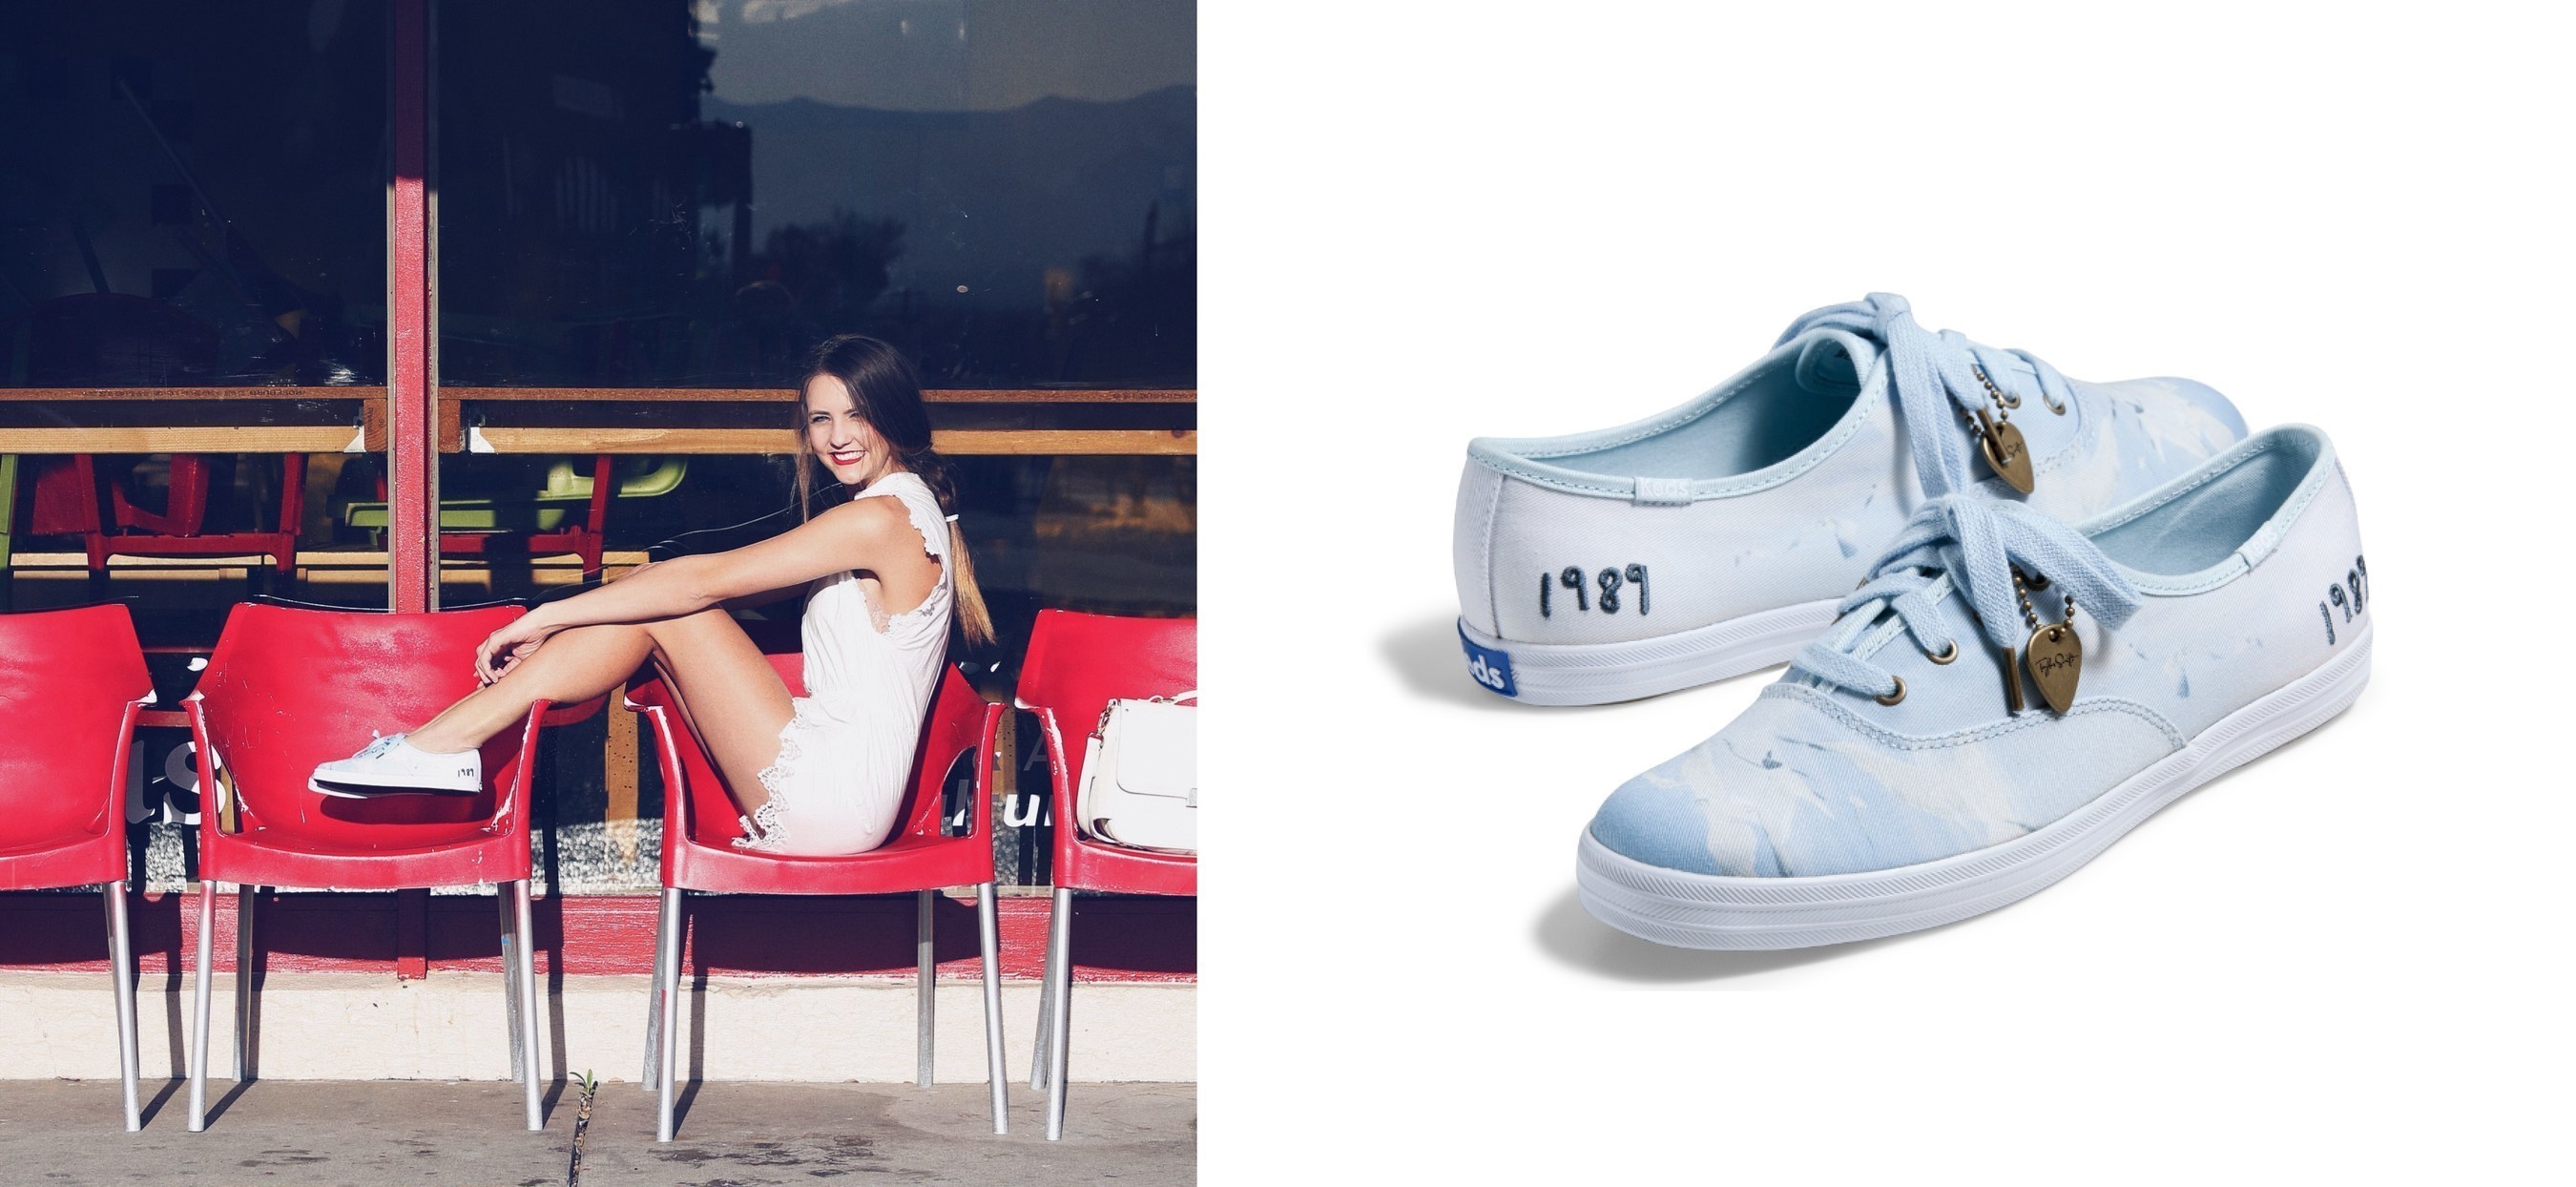 Unveils Limited Edition Sneaker In Celebration Of Taylor Swift's 'The 1989 World Tour'